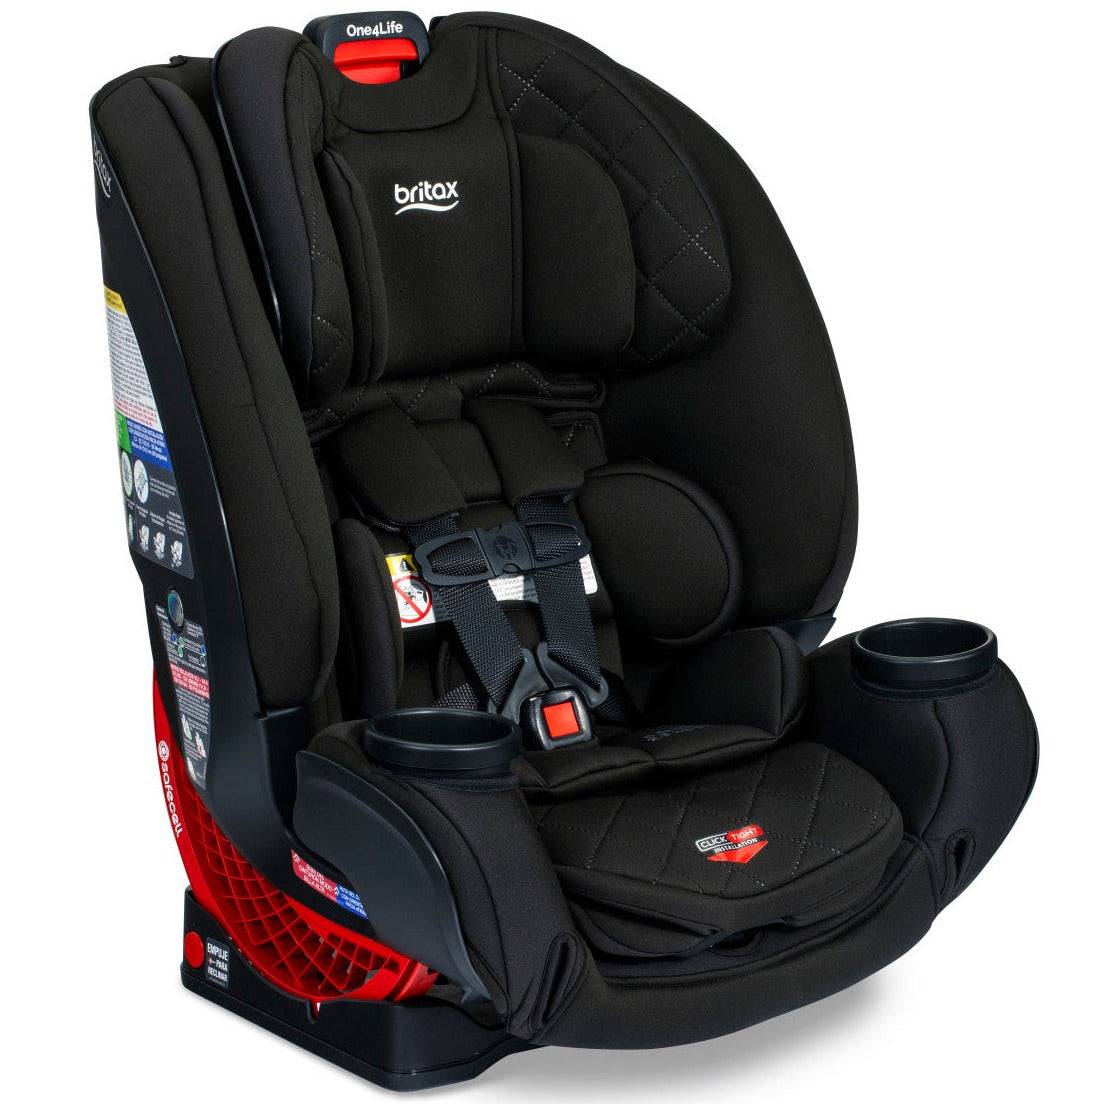 Britax One4Life ClickTight All-in-One Car Seat Twinkle Twinkle Little One